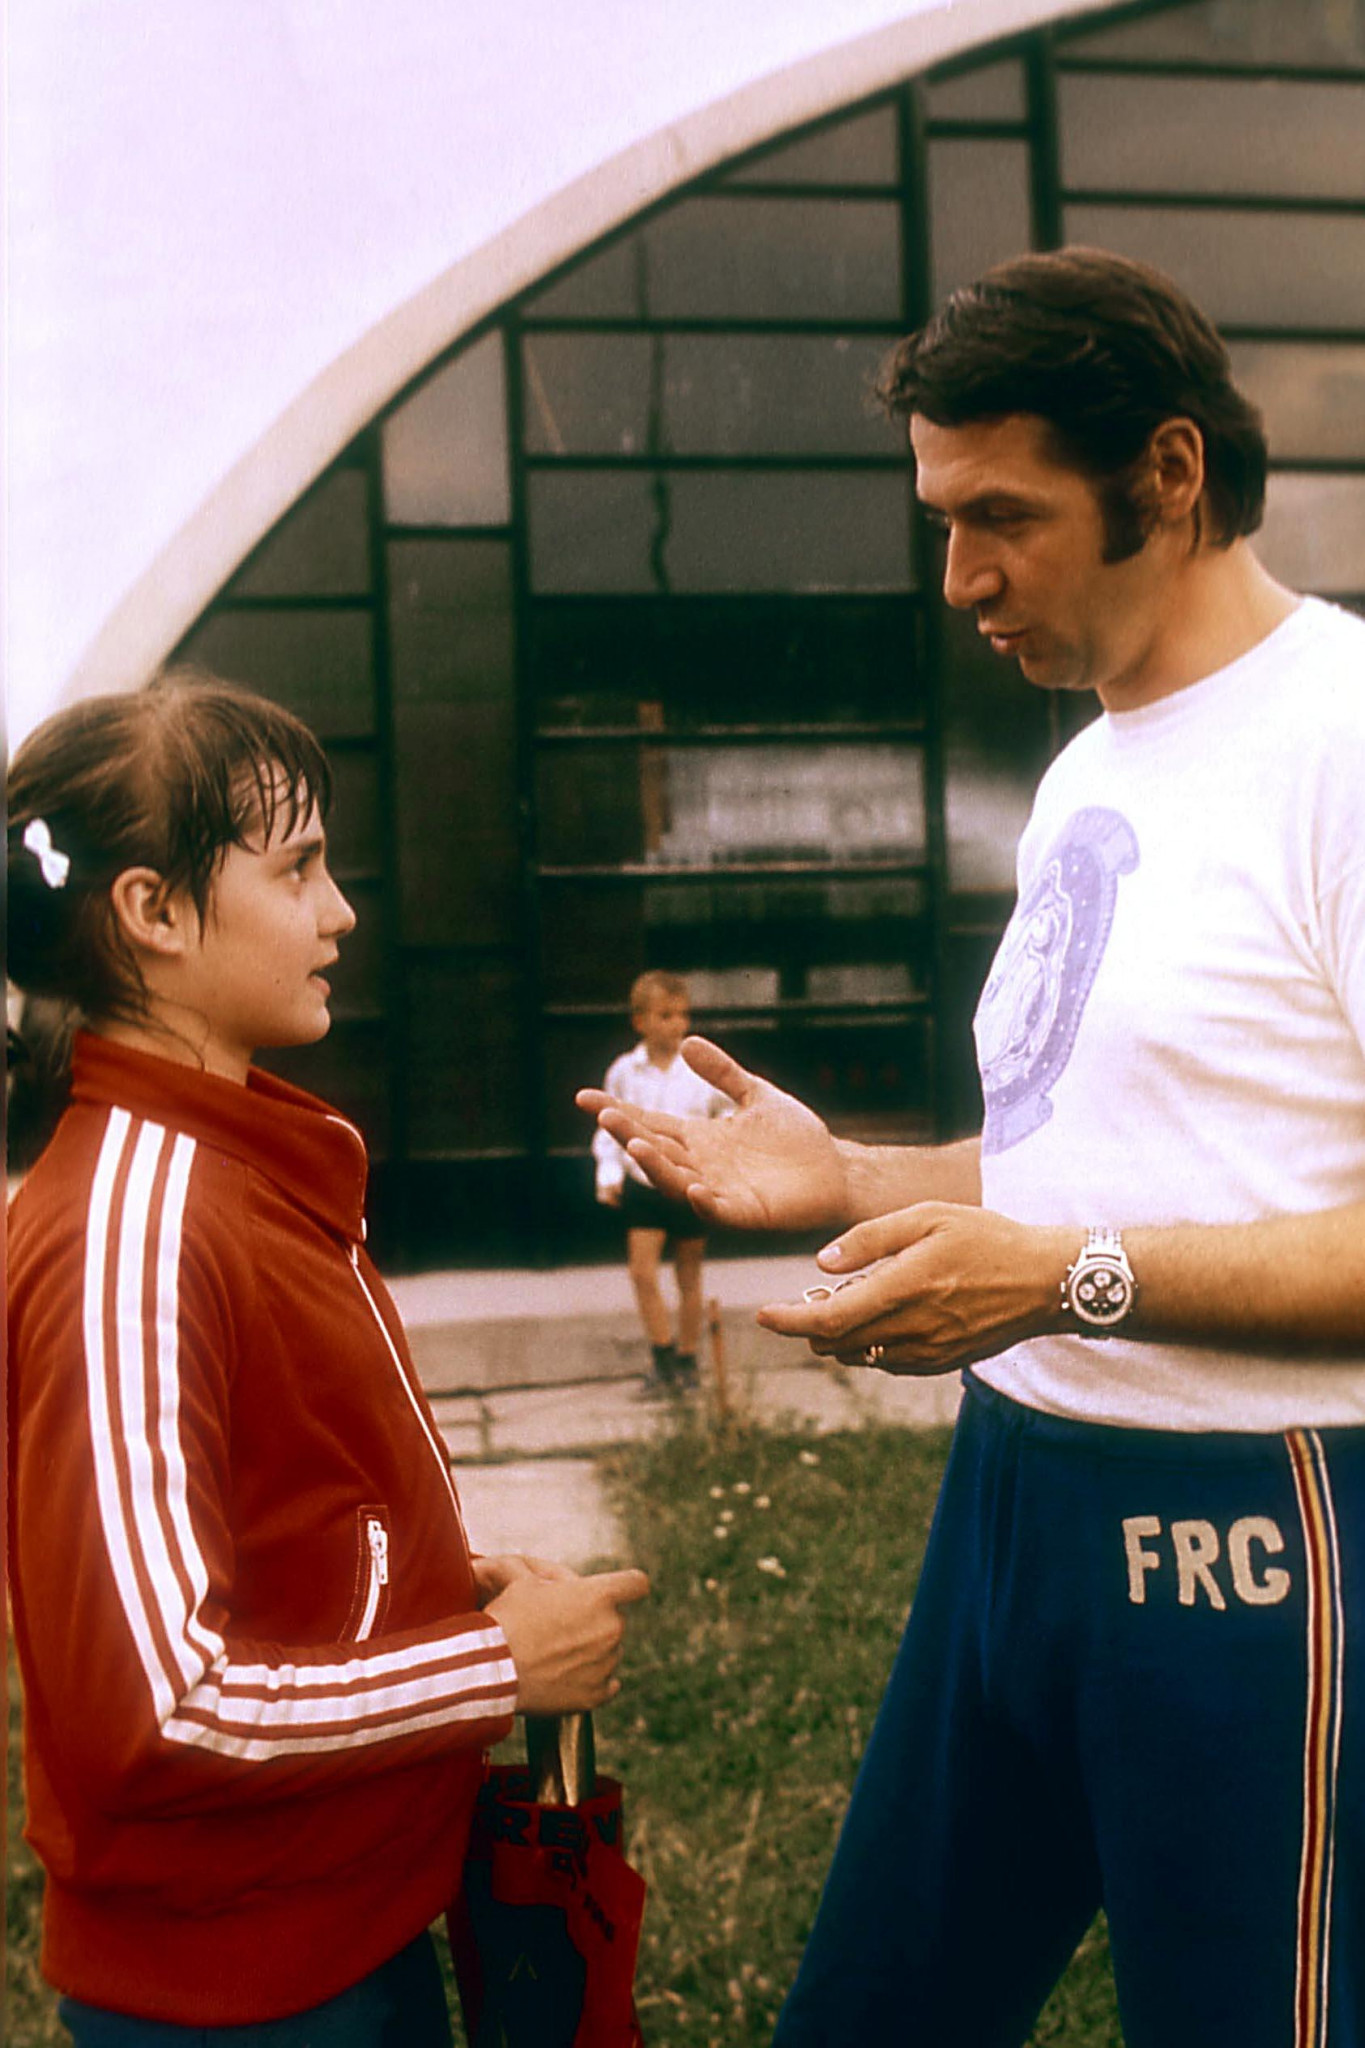 Nadia Comăneci, at the age of just 14, became the first gymnast to score a perfect at the 1976 Olympics but it later emerged she was physically abused by her coach Béla Károlyi ©Getty Images